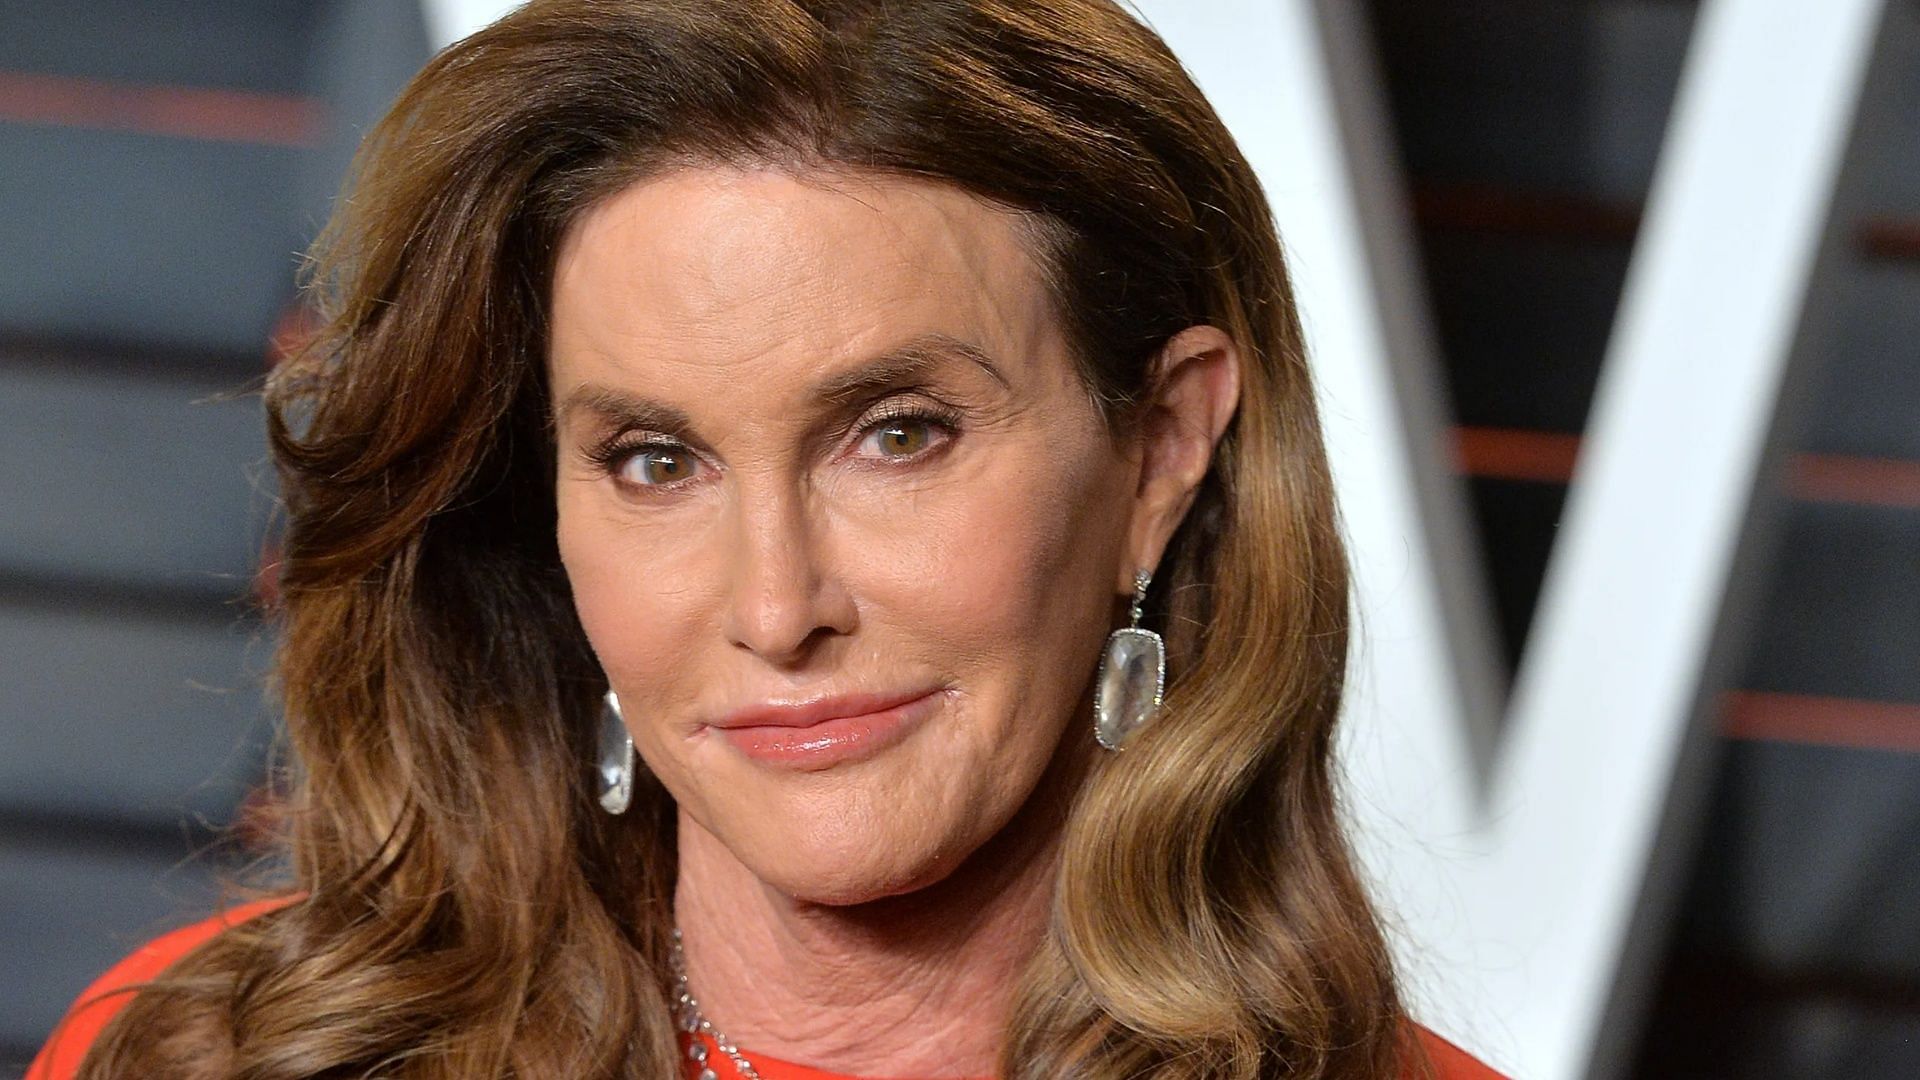 "Typical Republican" Netizens slam Caitlyn Jenner as reality star